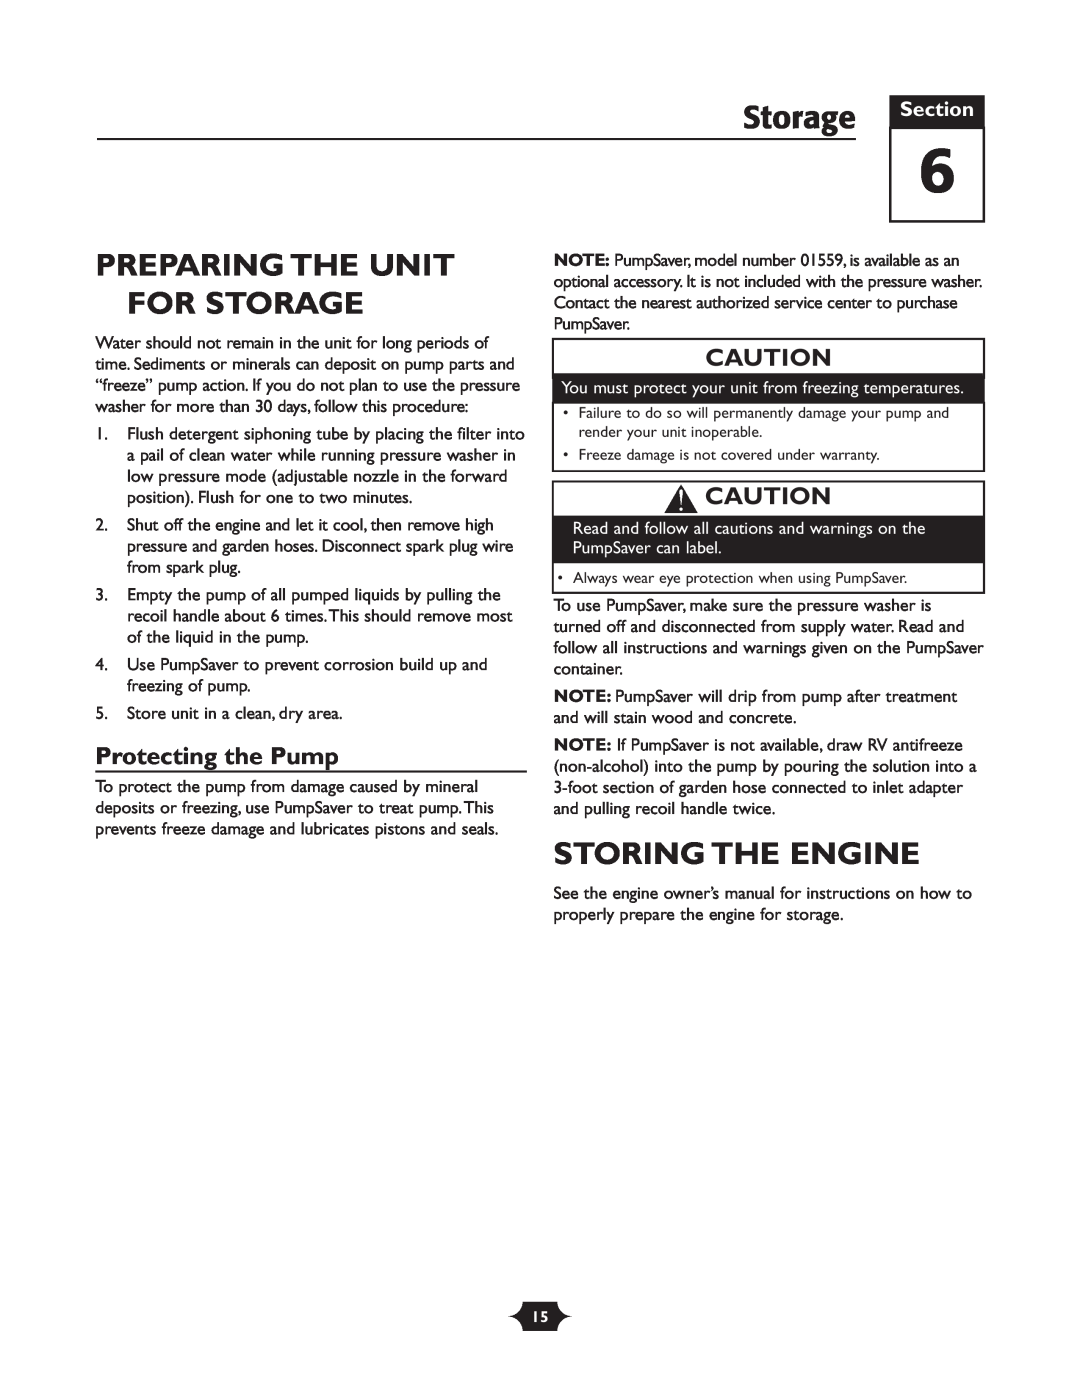 Troy-Bilt 20207 manual Preparing The Unit For Storage, Storing The Engine, Protecting the Pump, Section 